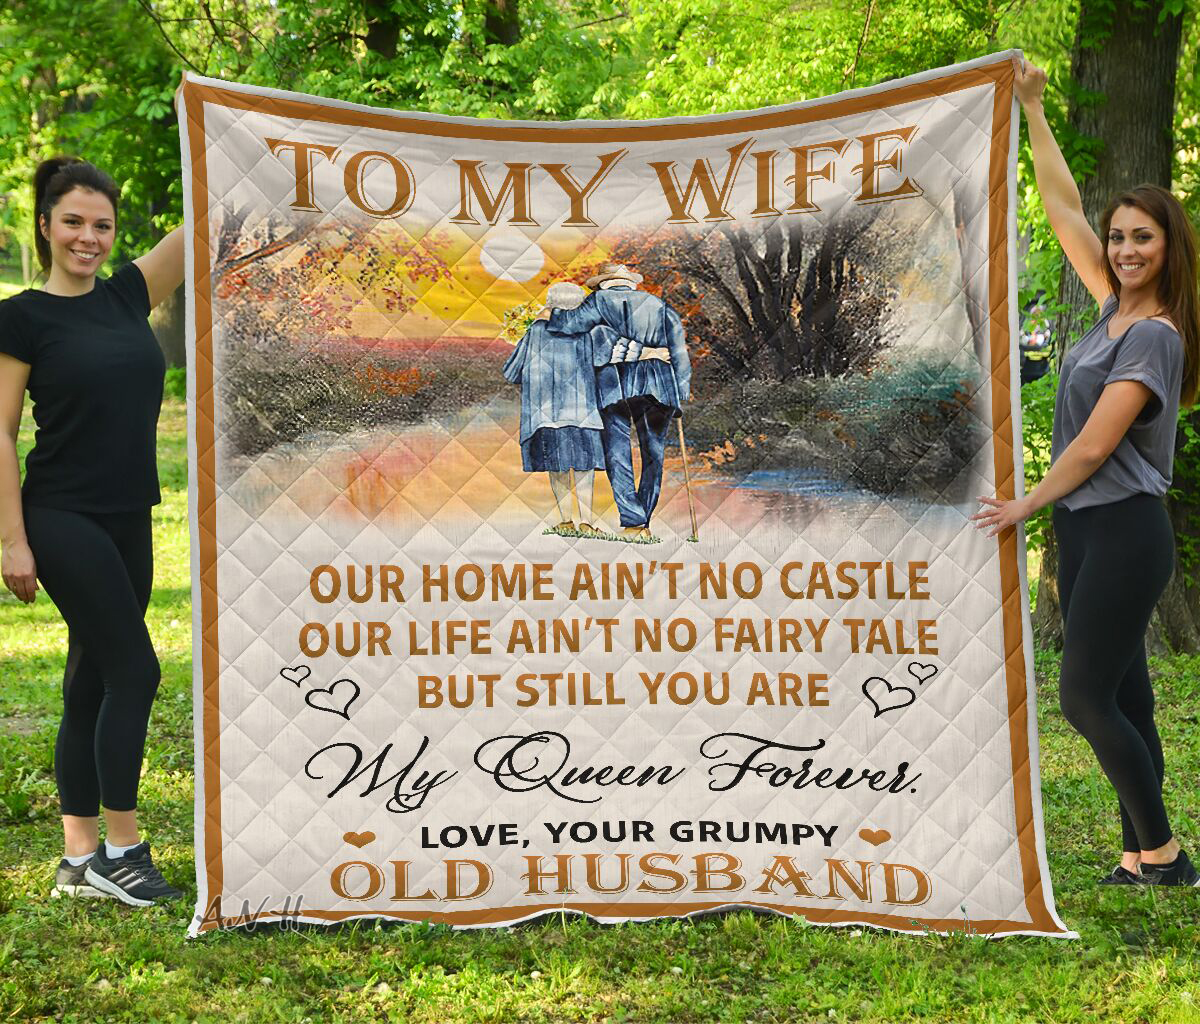 To my wife old husband quilt blanket – Saleoff 271020